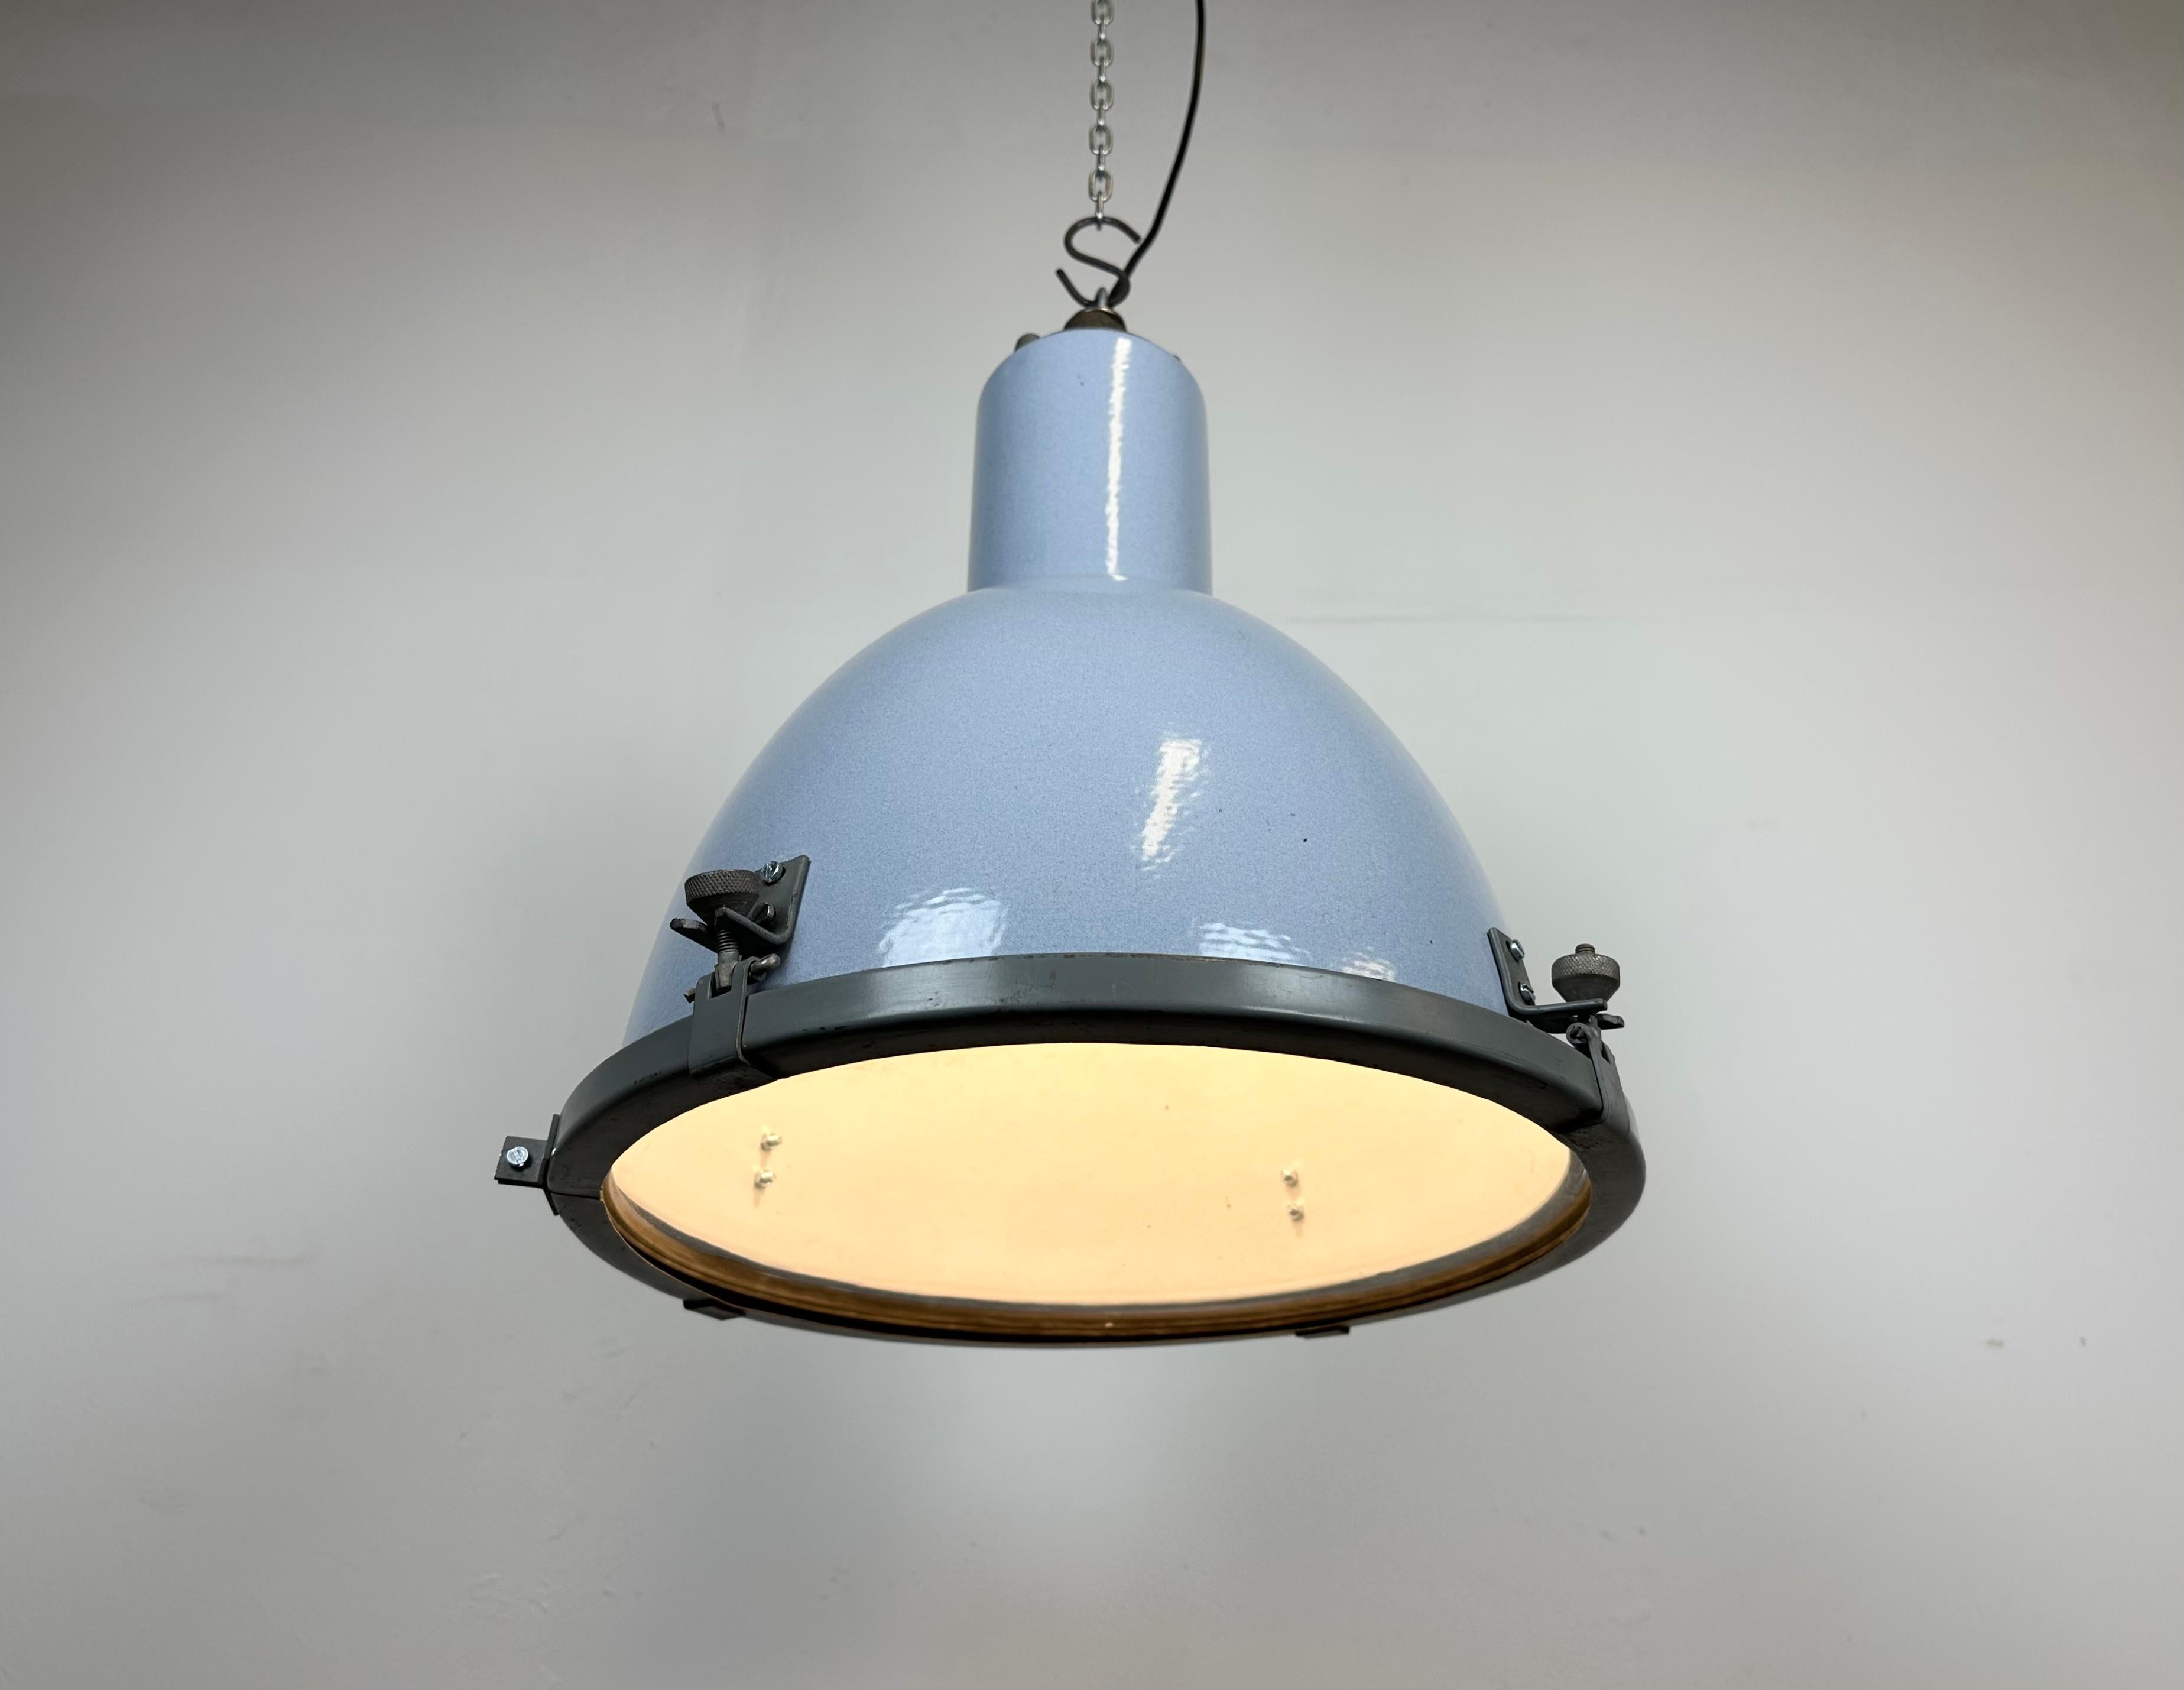 Bauhaus Grey Enamel Industrial Pendant Lamp with Glass Cover, 1950s For Sale 6